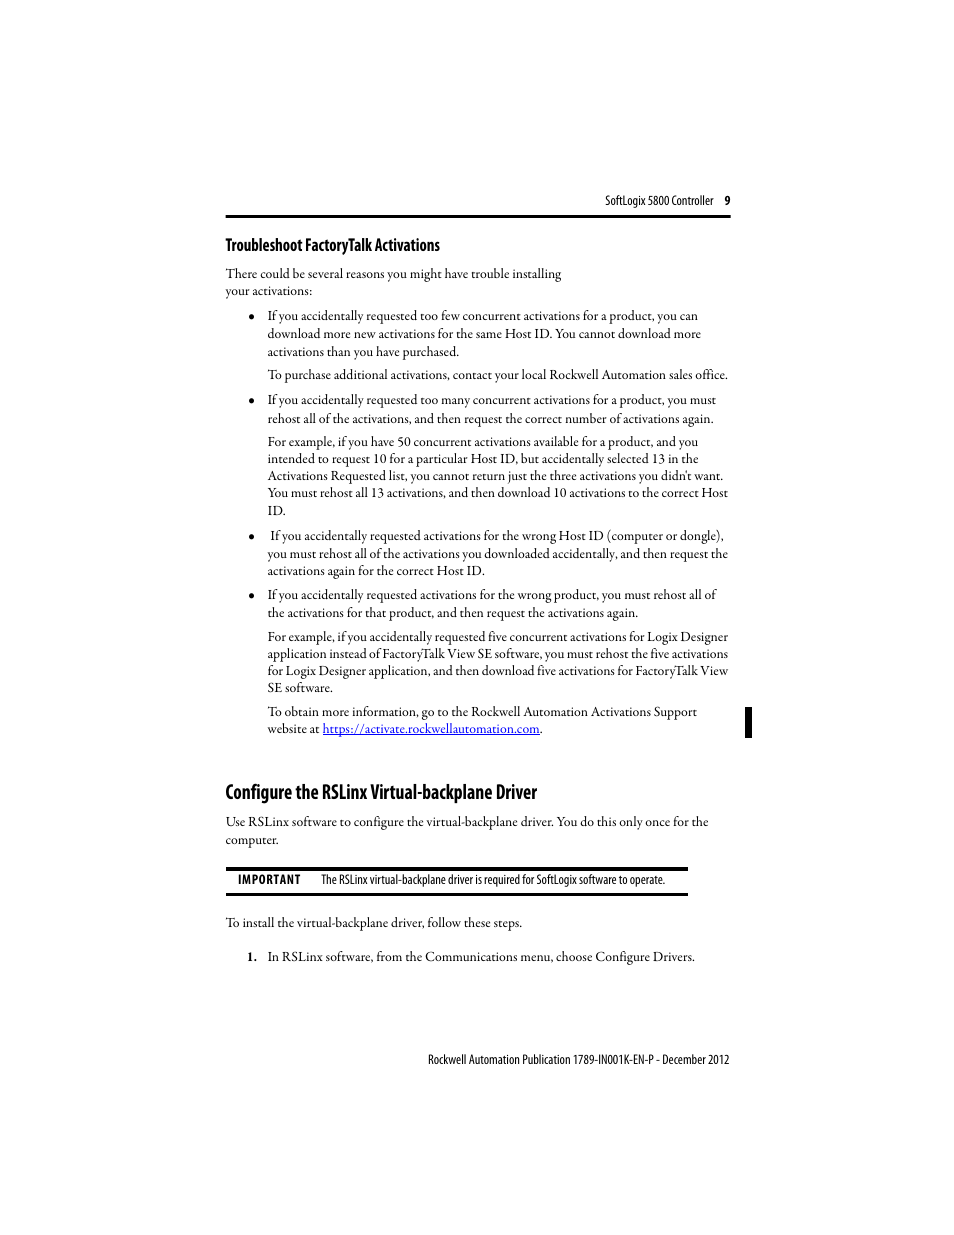 Troubleshoot factorytalk activations, Configure the rslinx virtual-backplane driver | Rockwell Automation 1789-L10_L30_L60 SoftLogix 5800 Controller Installation Instructions User Manual | Page 9 / 14